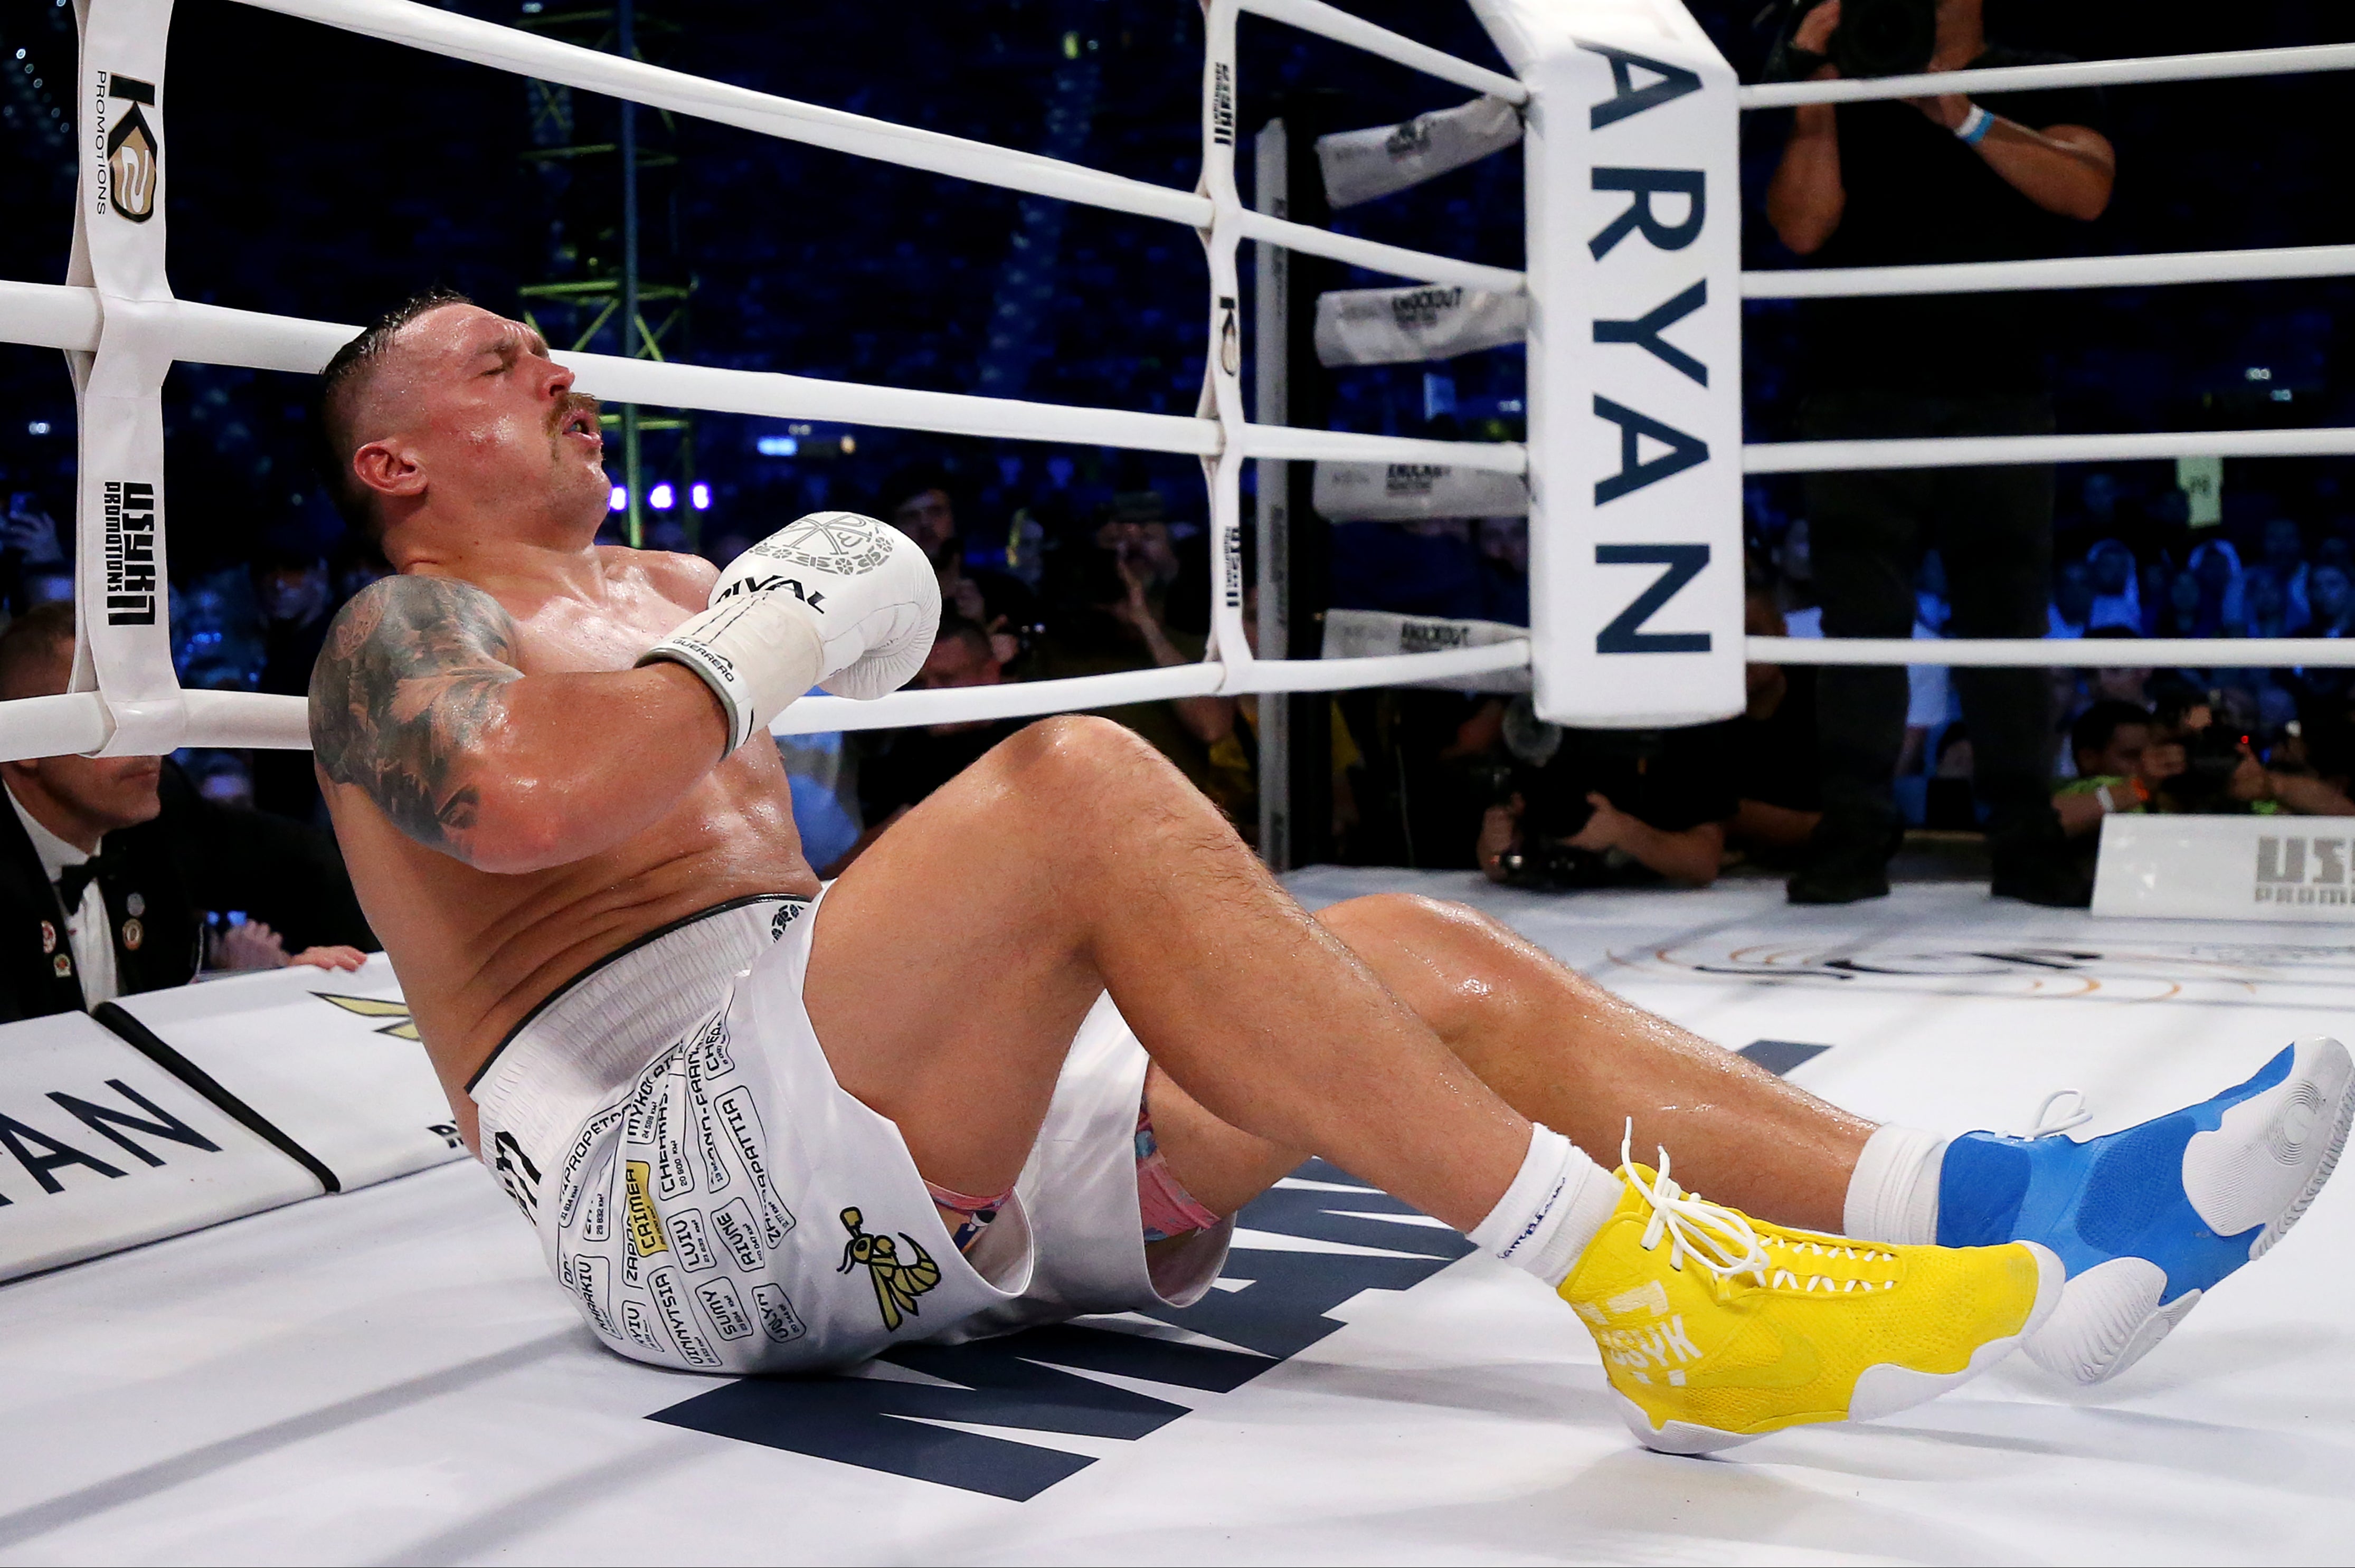 Usyk took four minutes to recover from the alleged low blow, which seemed to land on the belt line